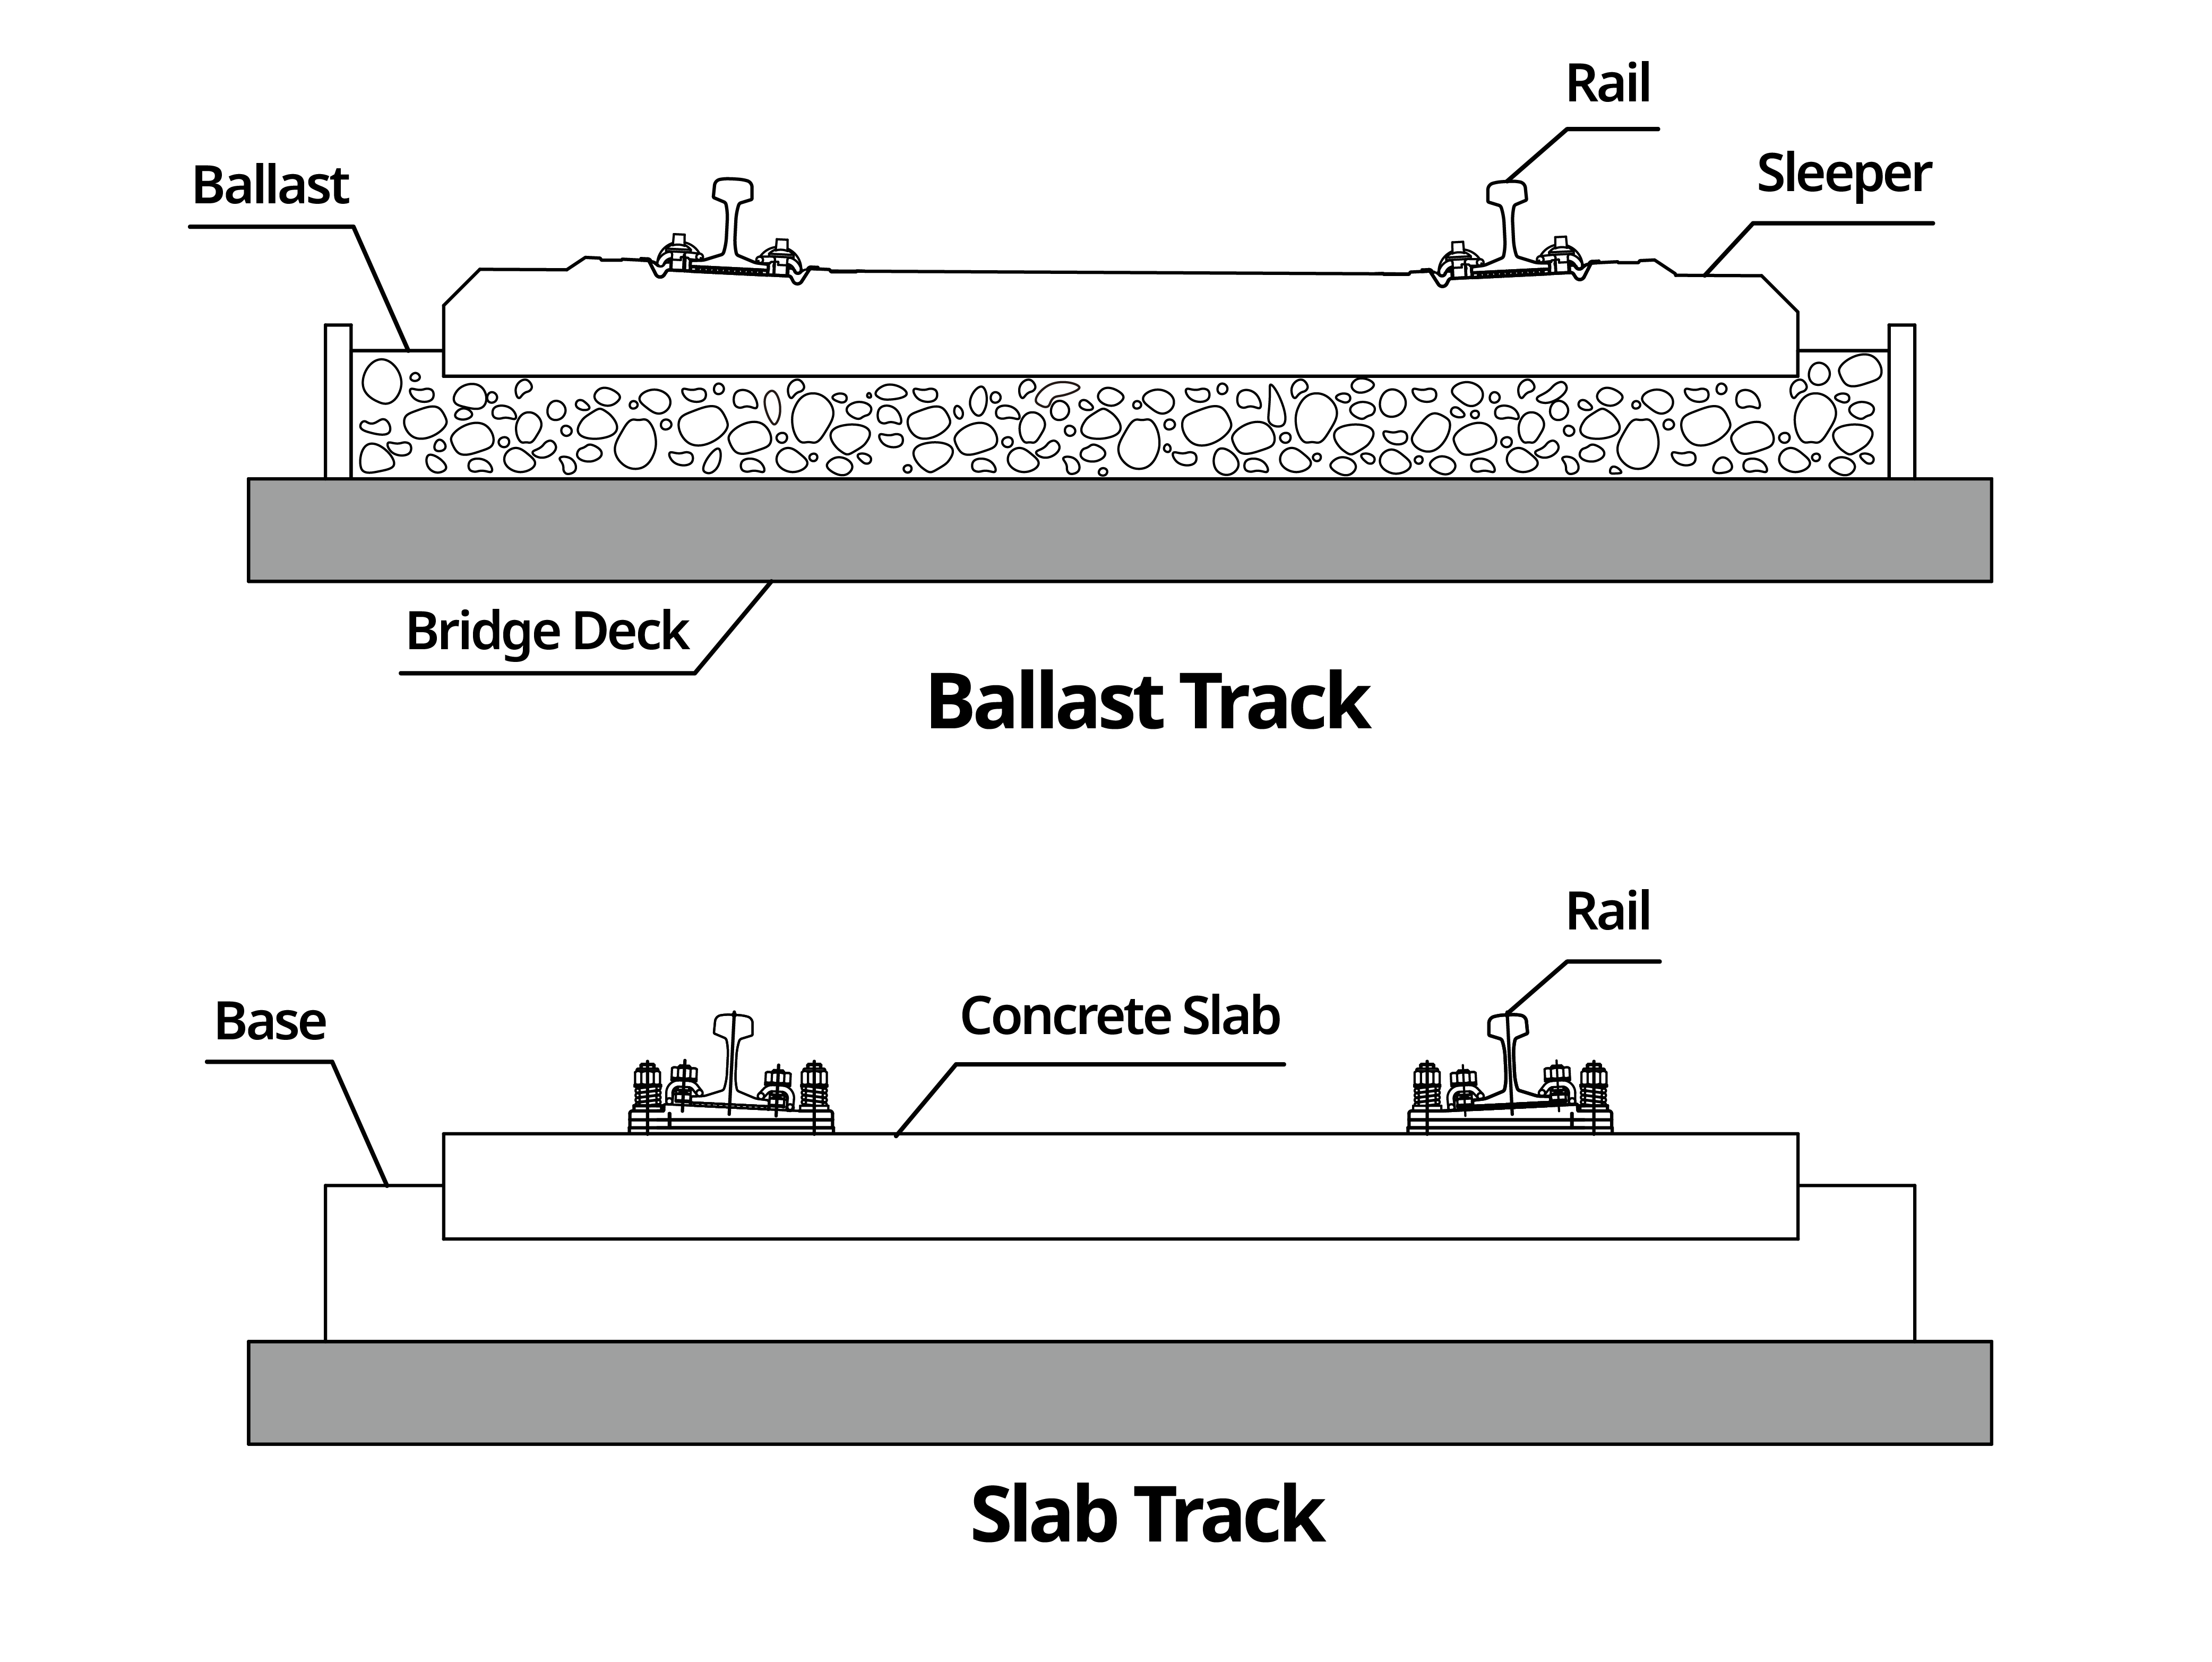 Railway Track and Structures